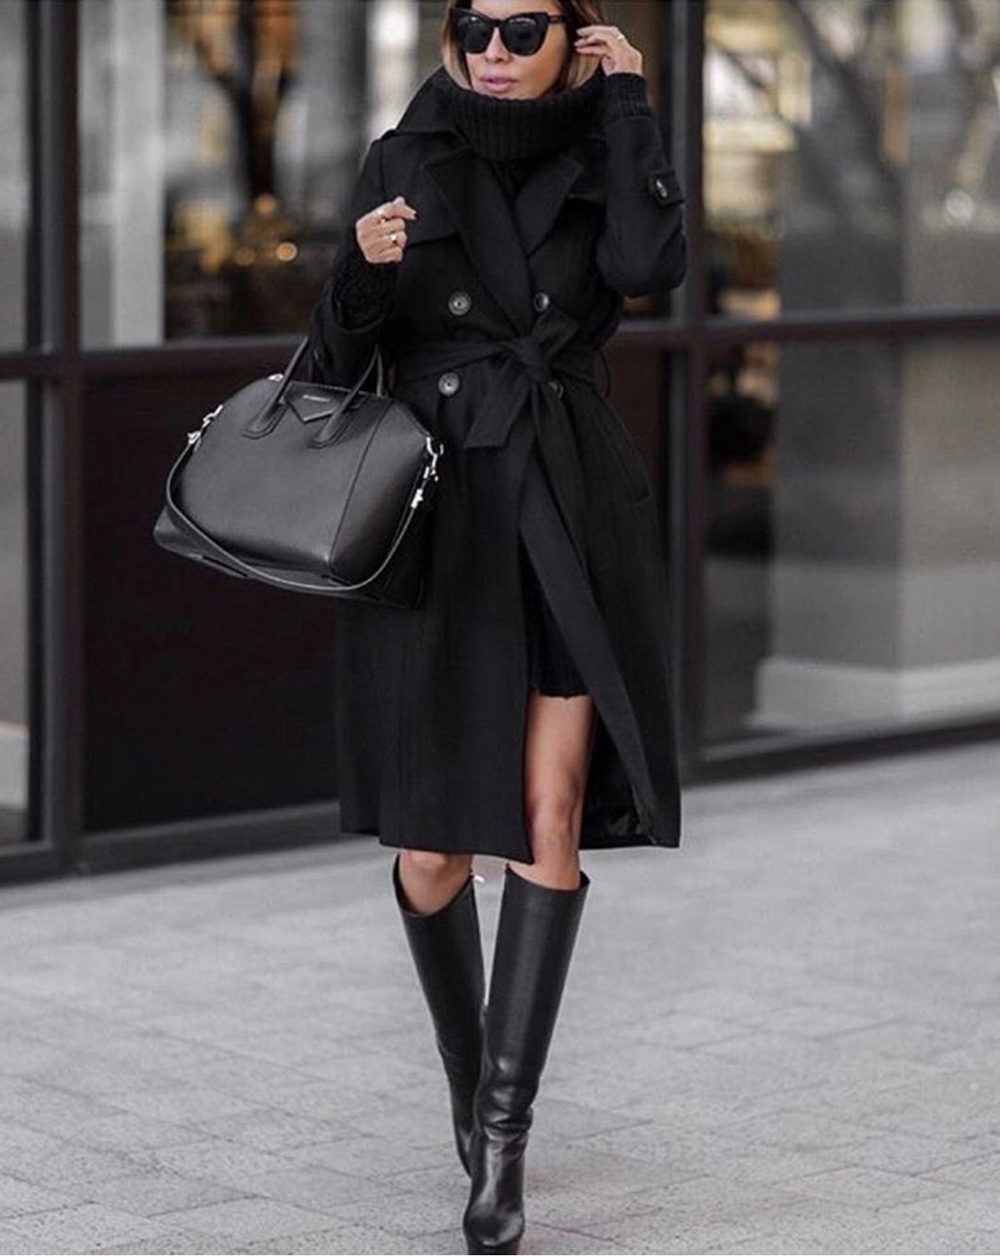 How to Dress Up An All Black Outfit, chic all black outfit, layered black outfit, sweater dress and boots, fall outfit | lolario style